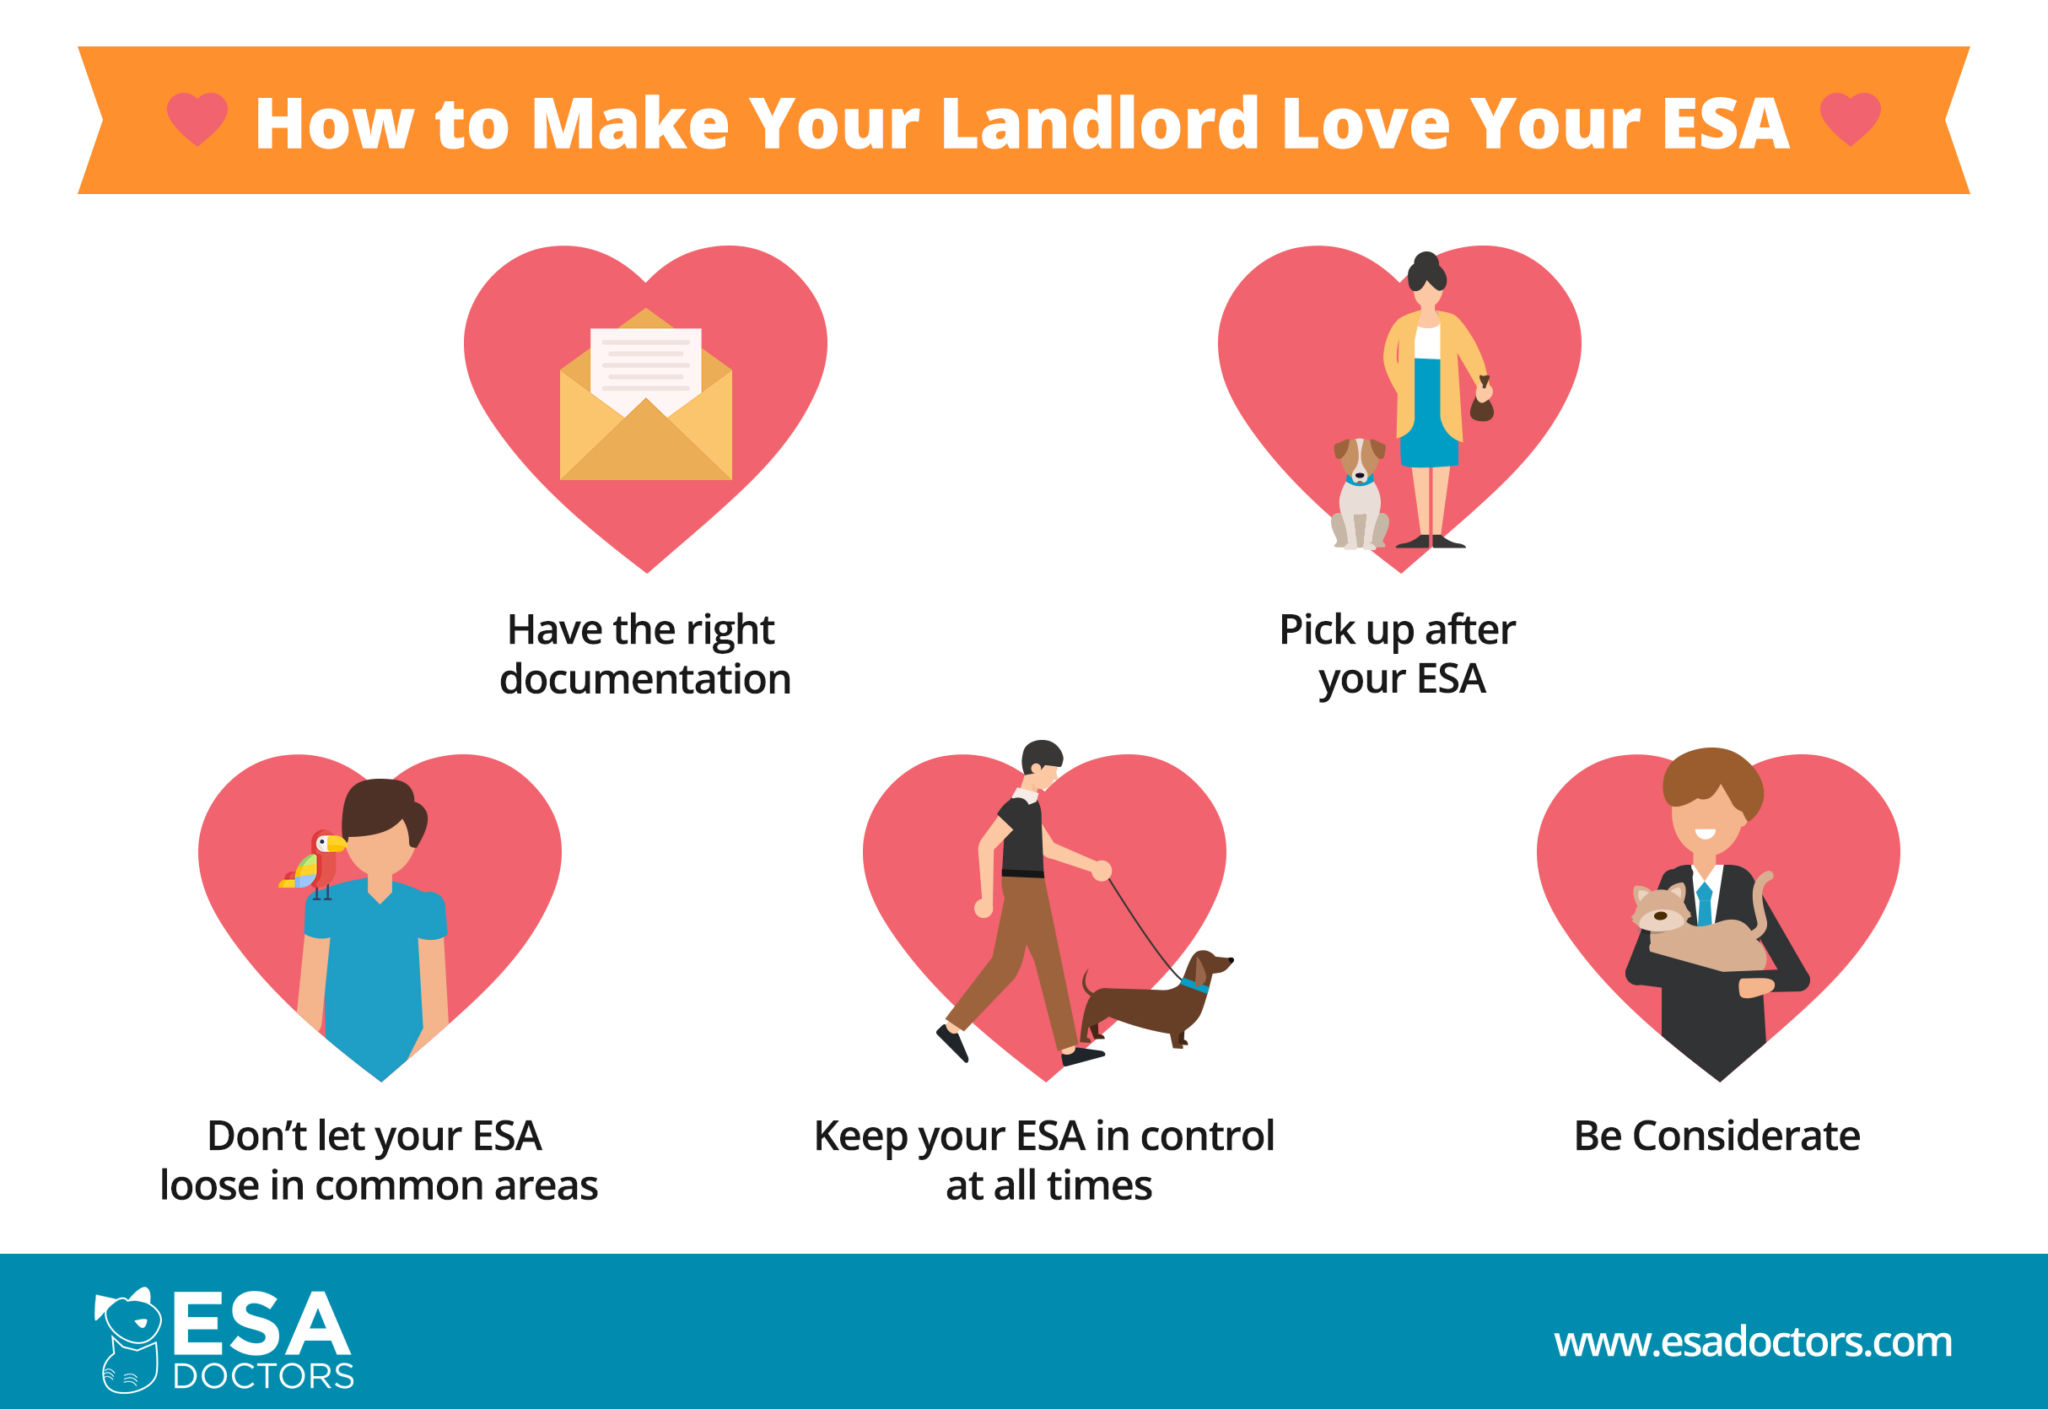 How to Make Your Landlord Love Your ESA - 5 Points Infographic - ESA Doctors